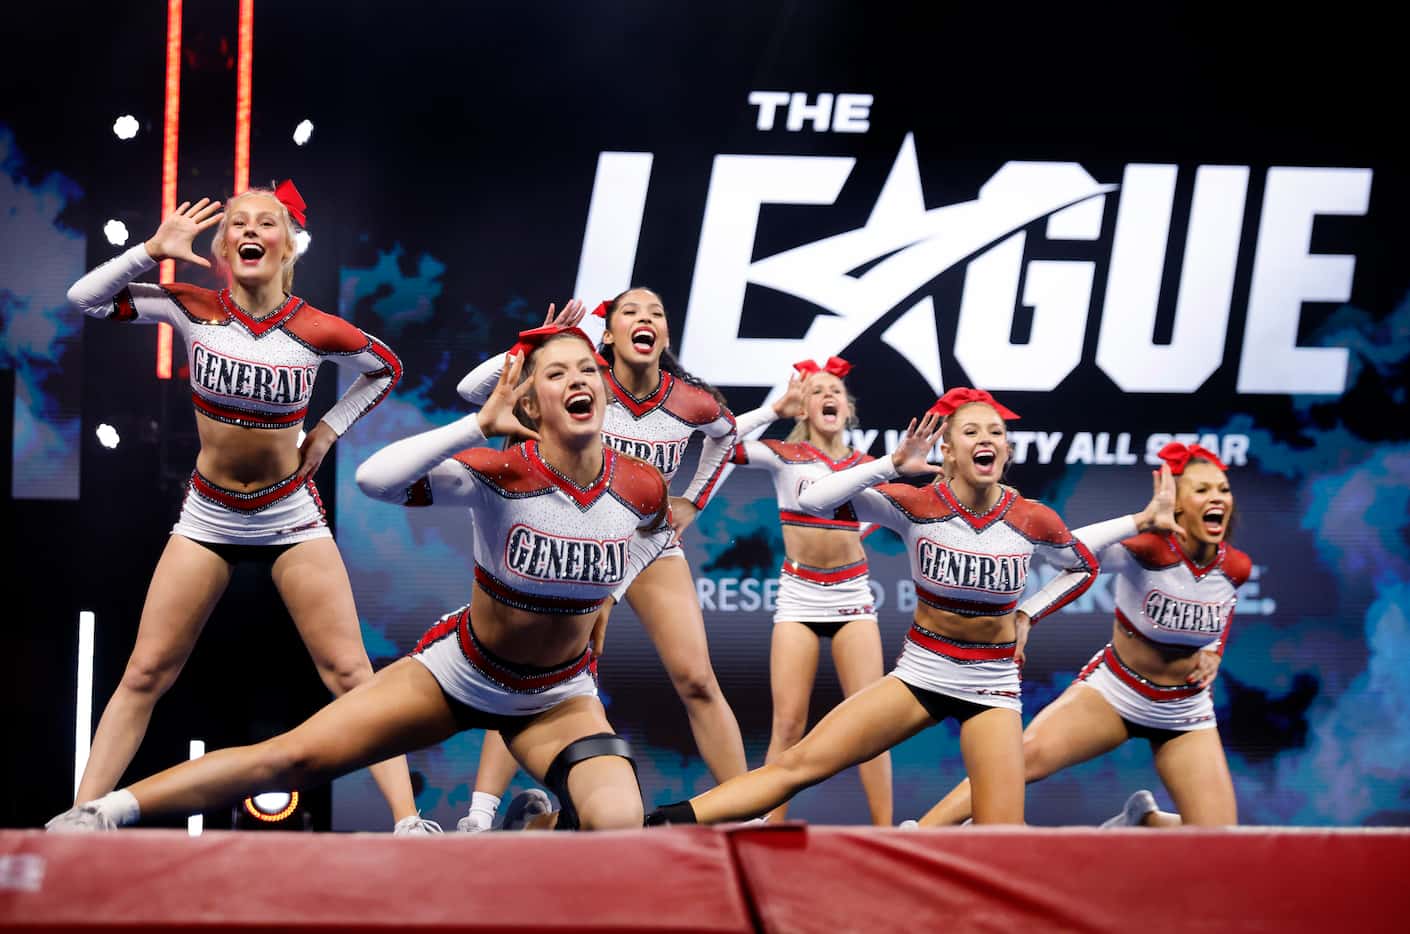 The Woodland Elite Generals team from Houston finishes their performance during the NCA...